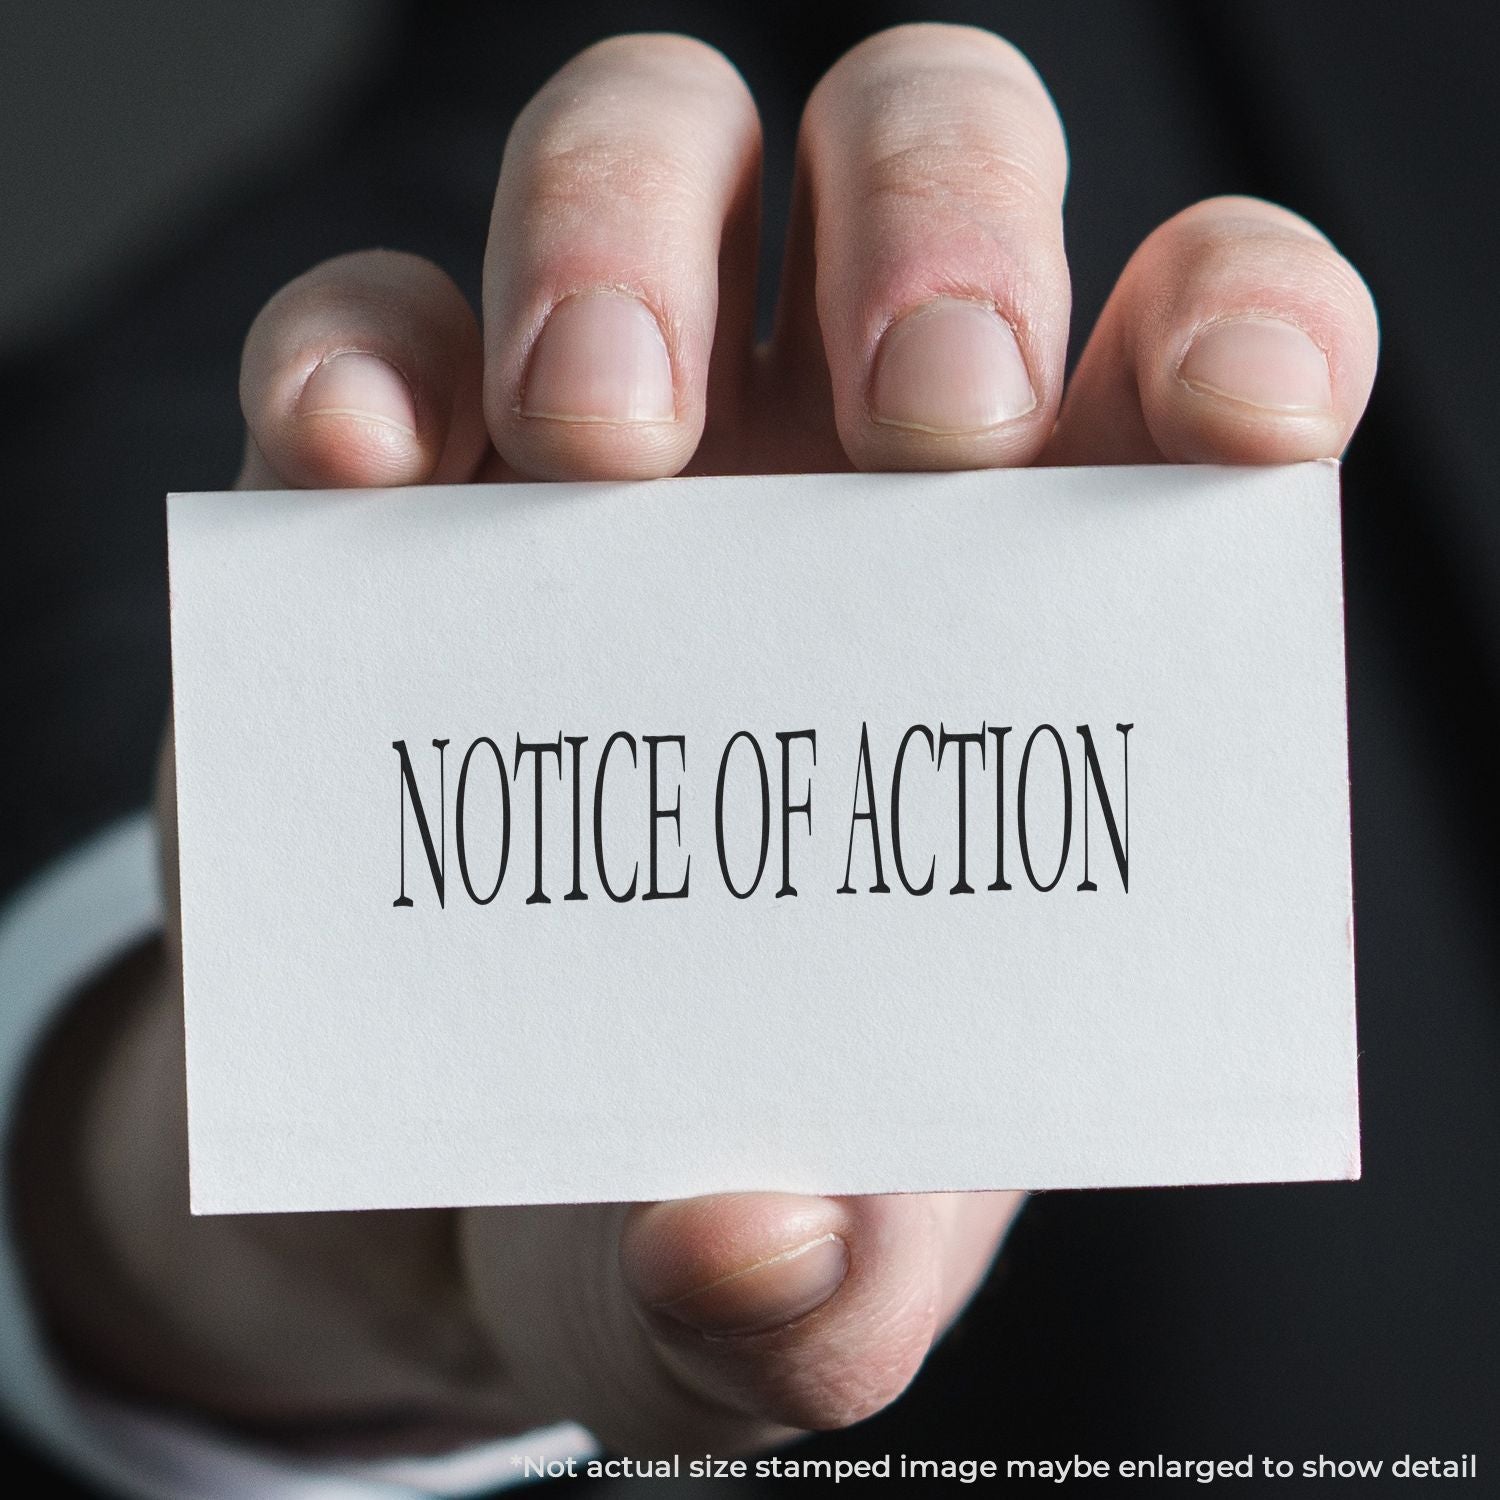 A self-inking stamp with a stamped image showing how the text "NOTICE OF ACTION" is displayed after stamping.